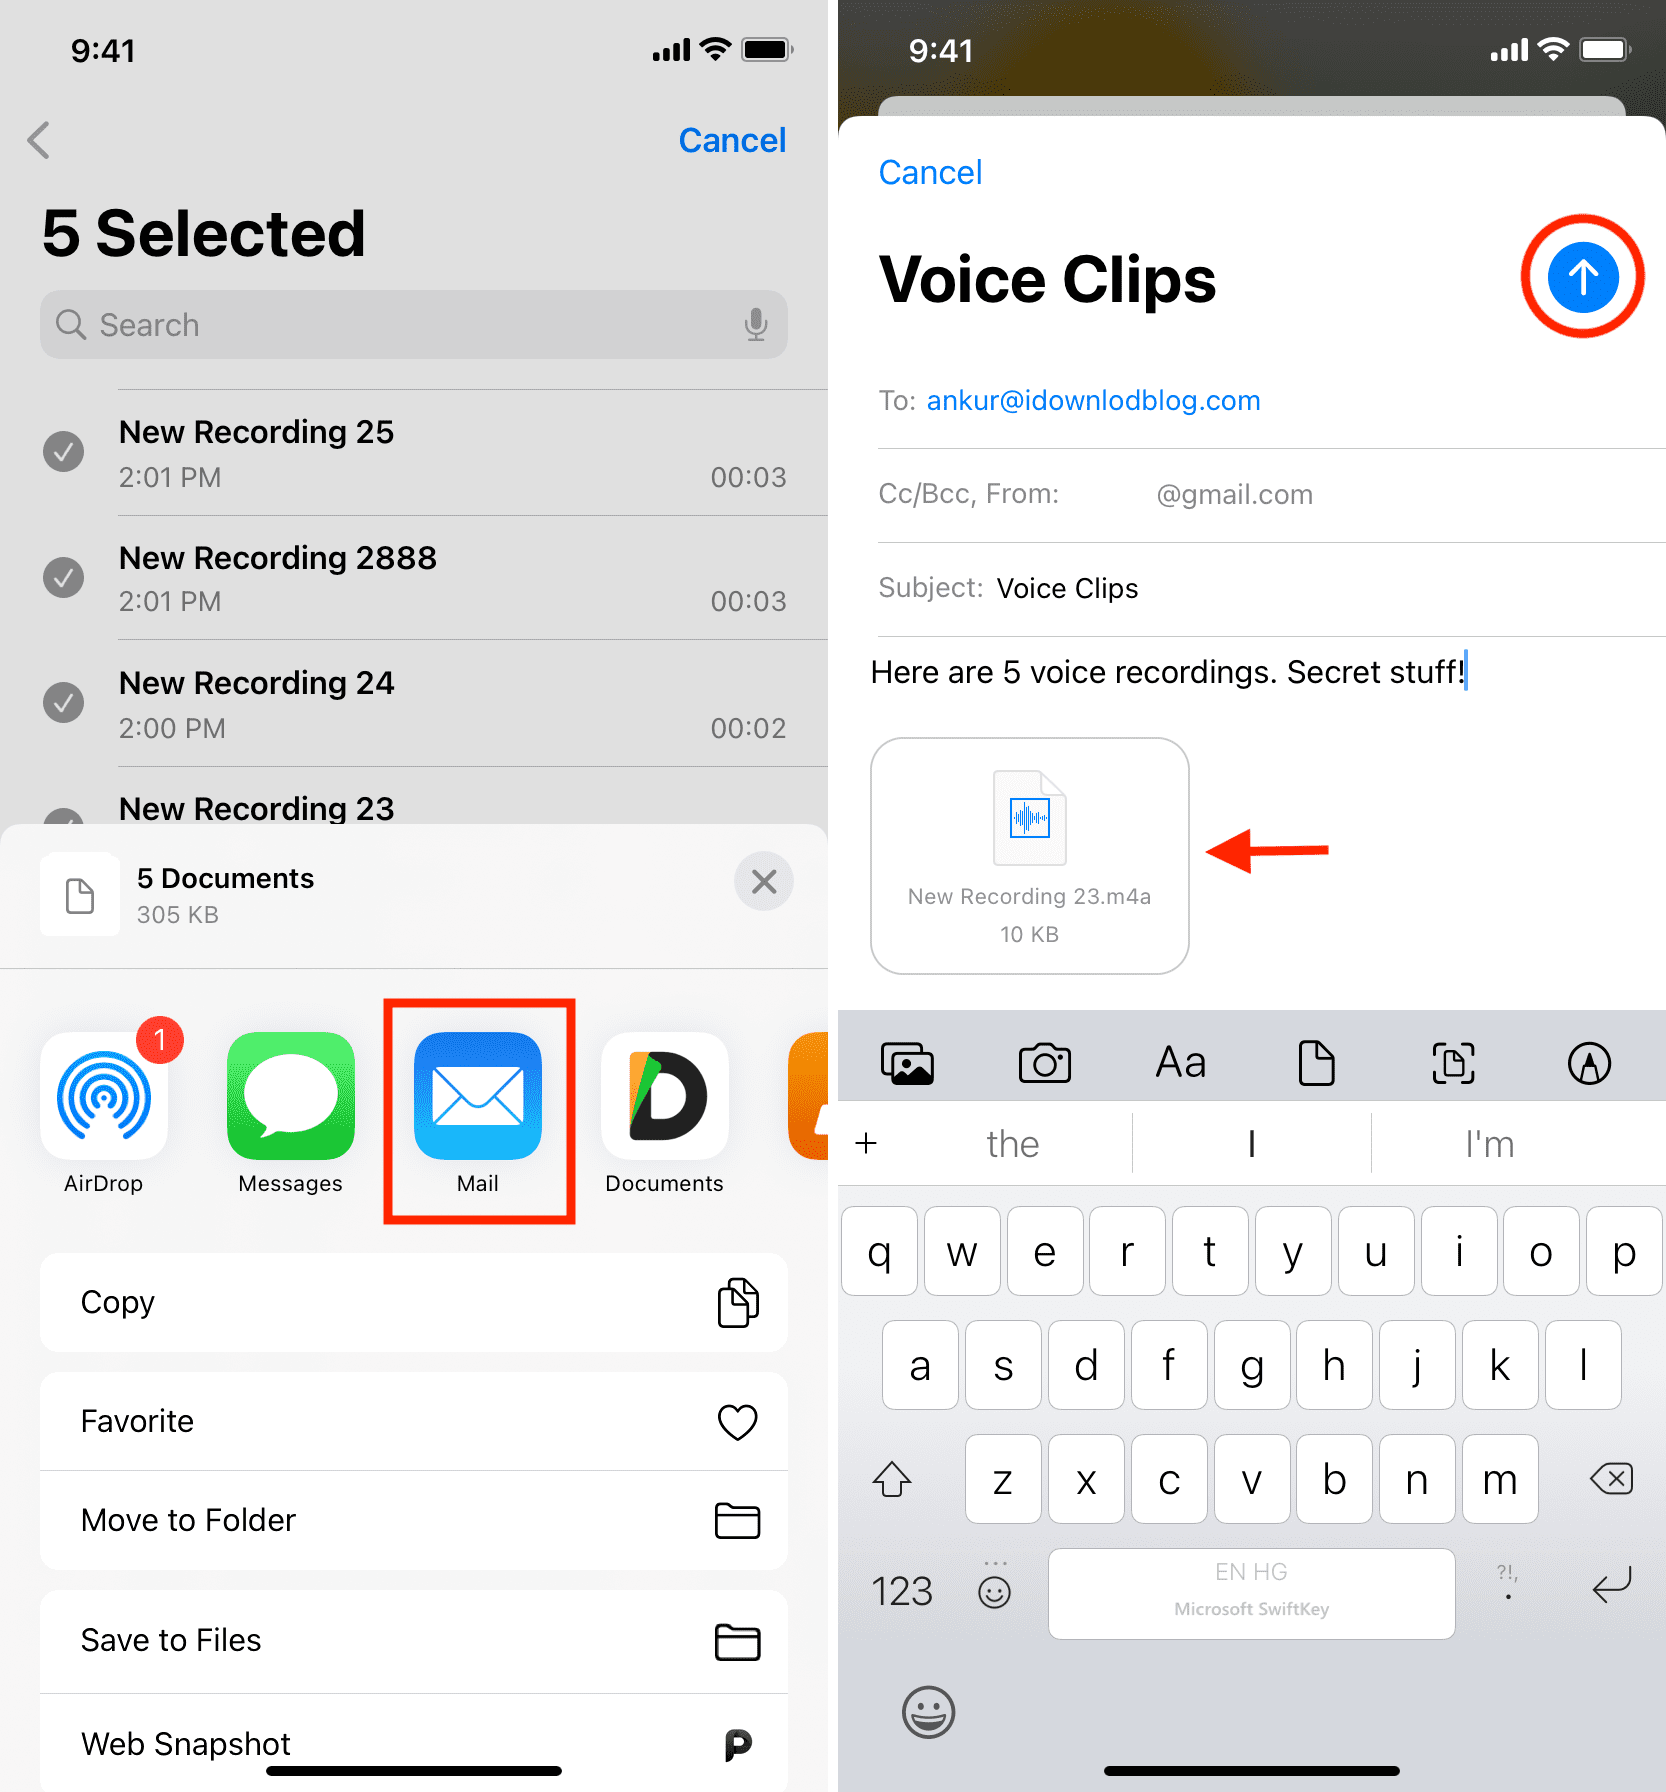 Transfer voice memos from iPhone to computer via email